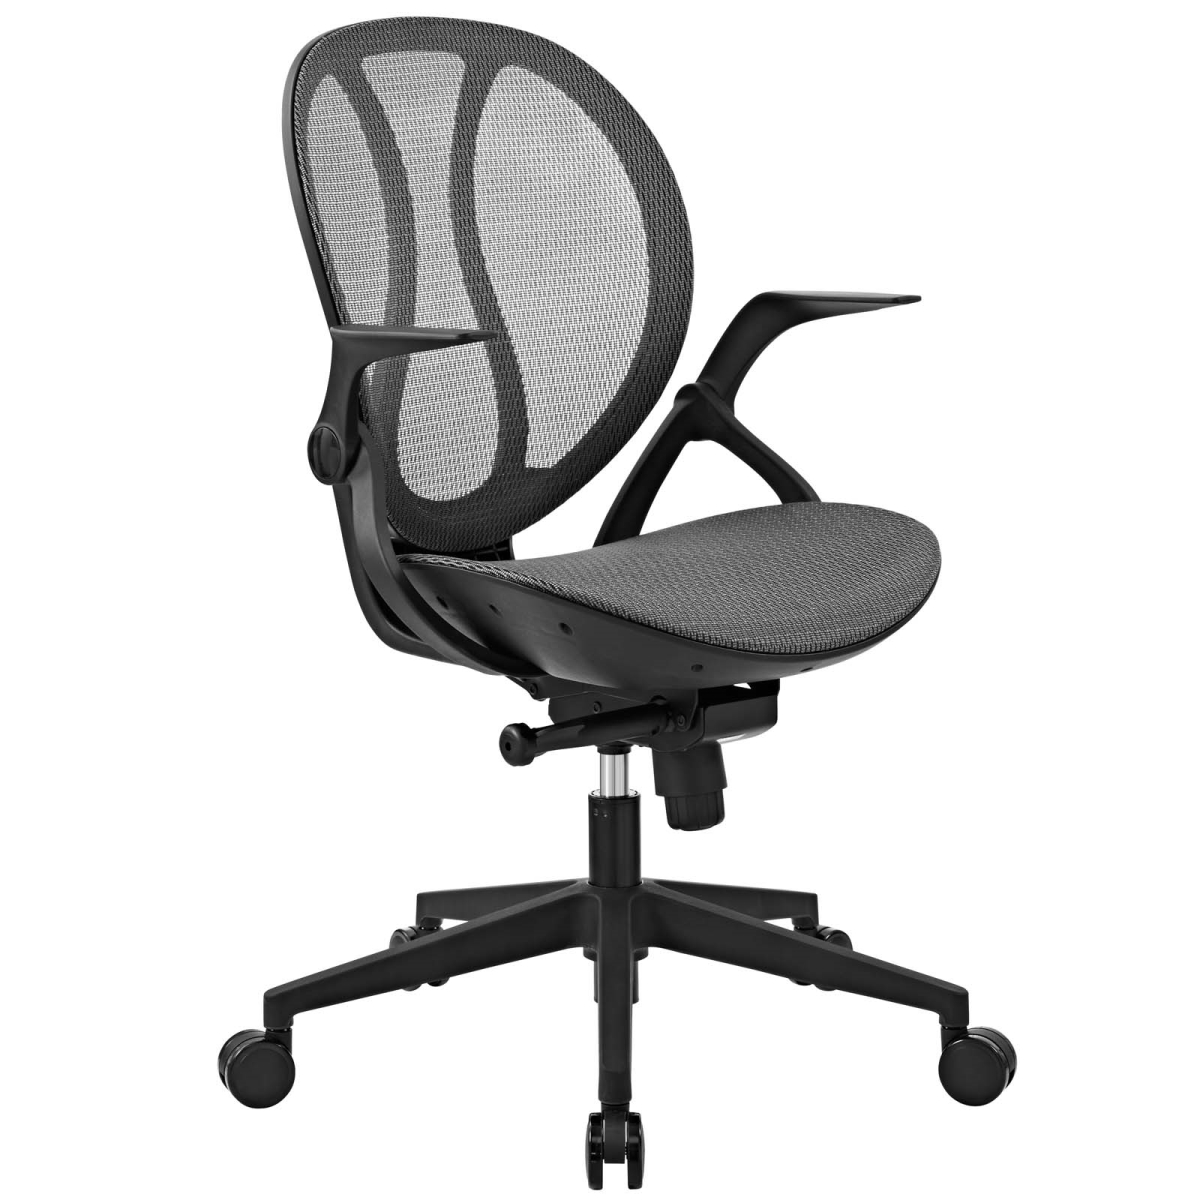 Modway Eei-2772-gry 42.5 H X 26.5 W X 22.5 D In. Conduct All Mesh Office Chair, Gray